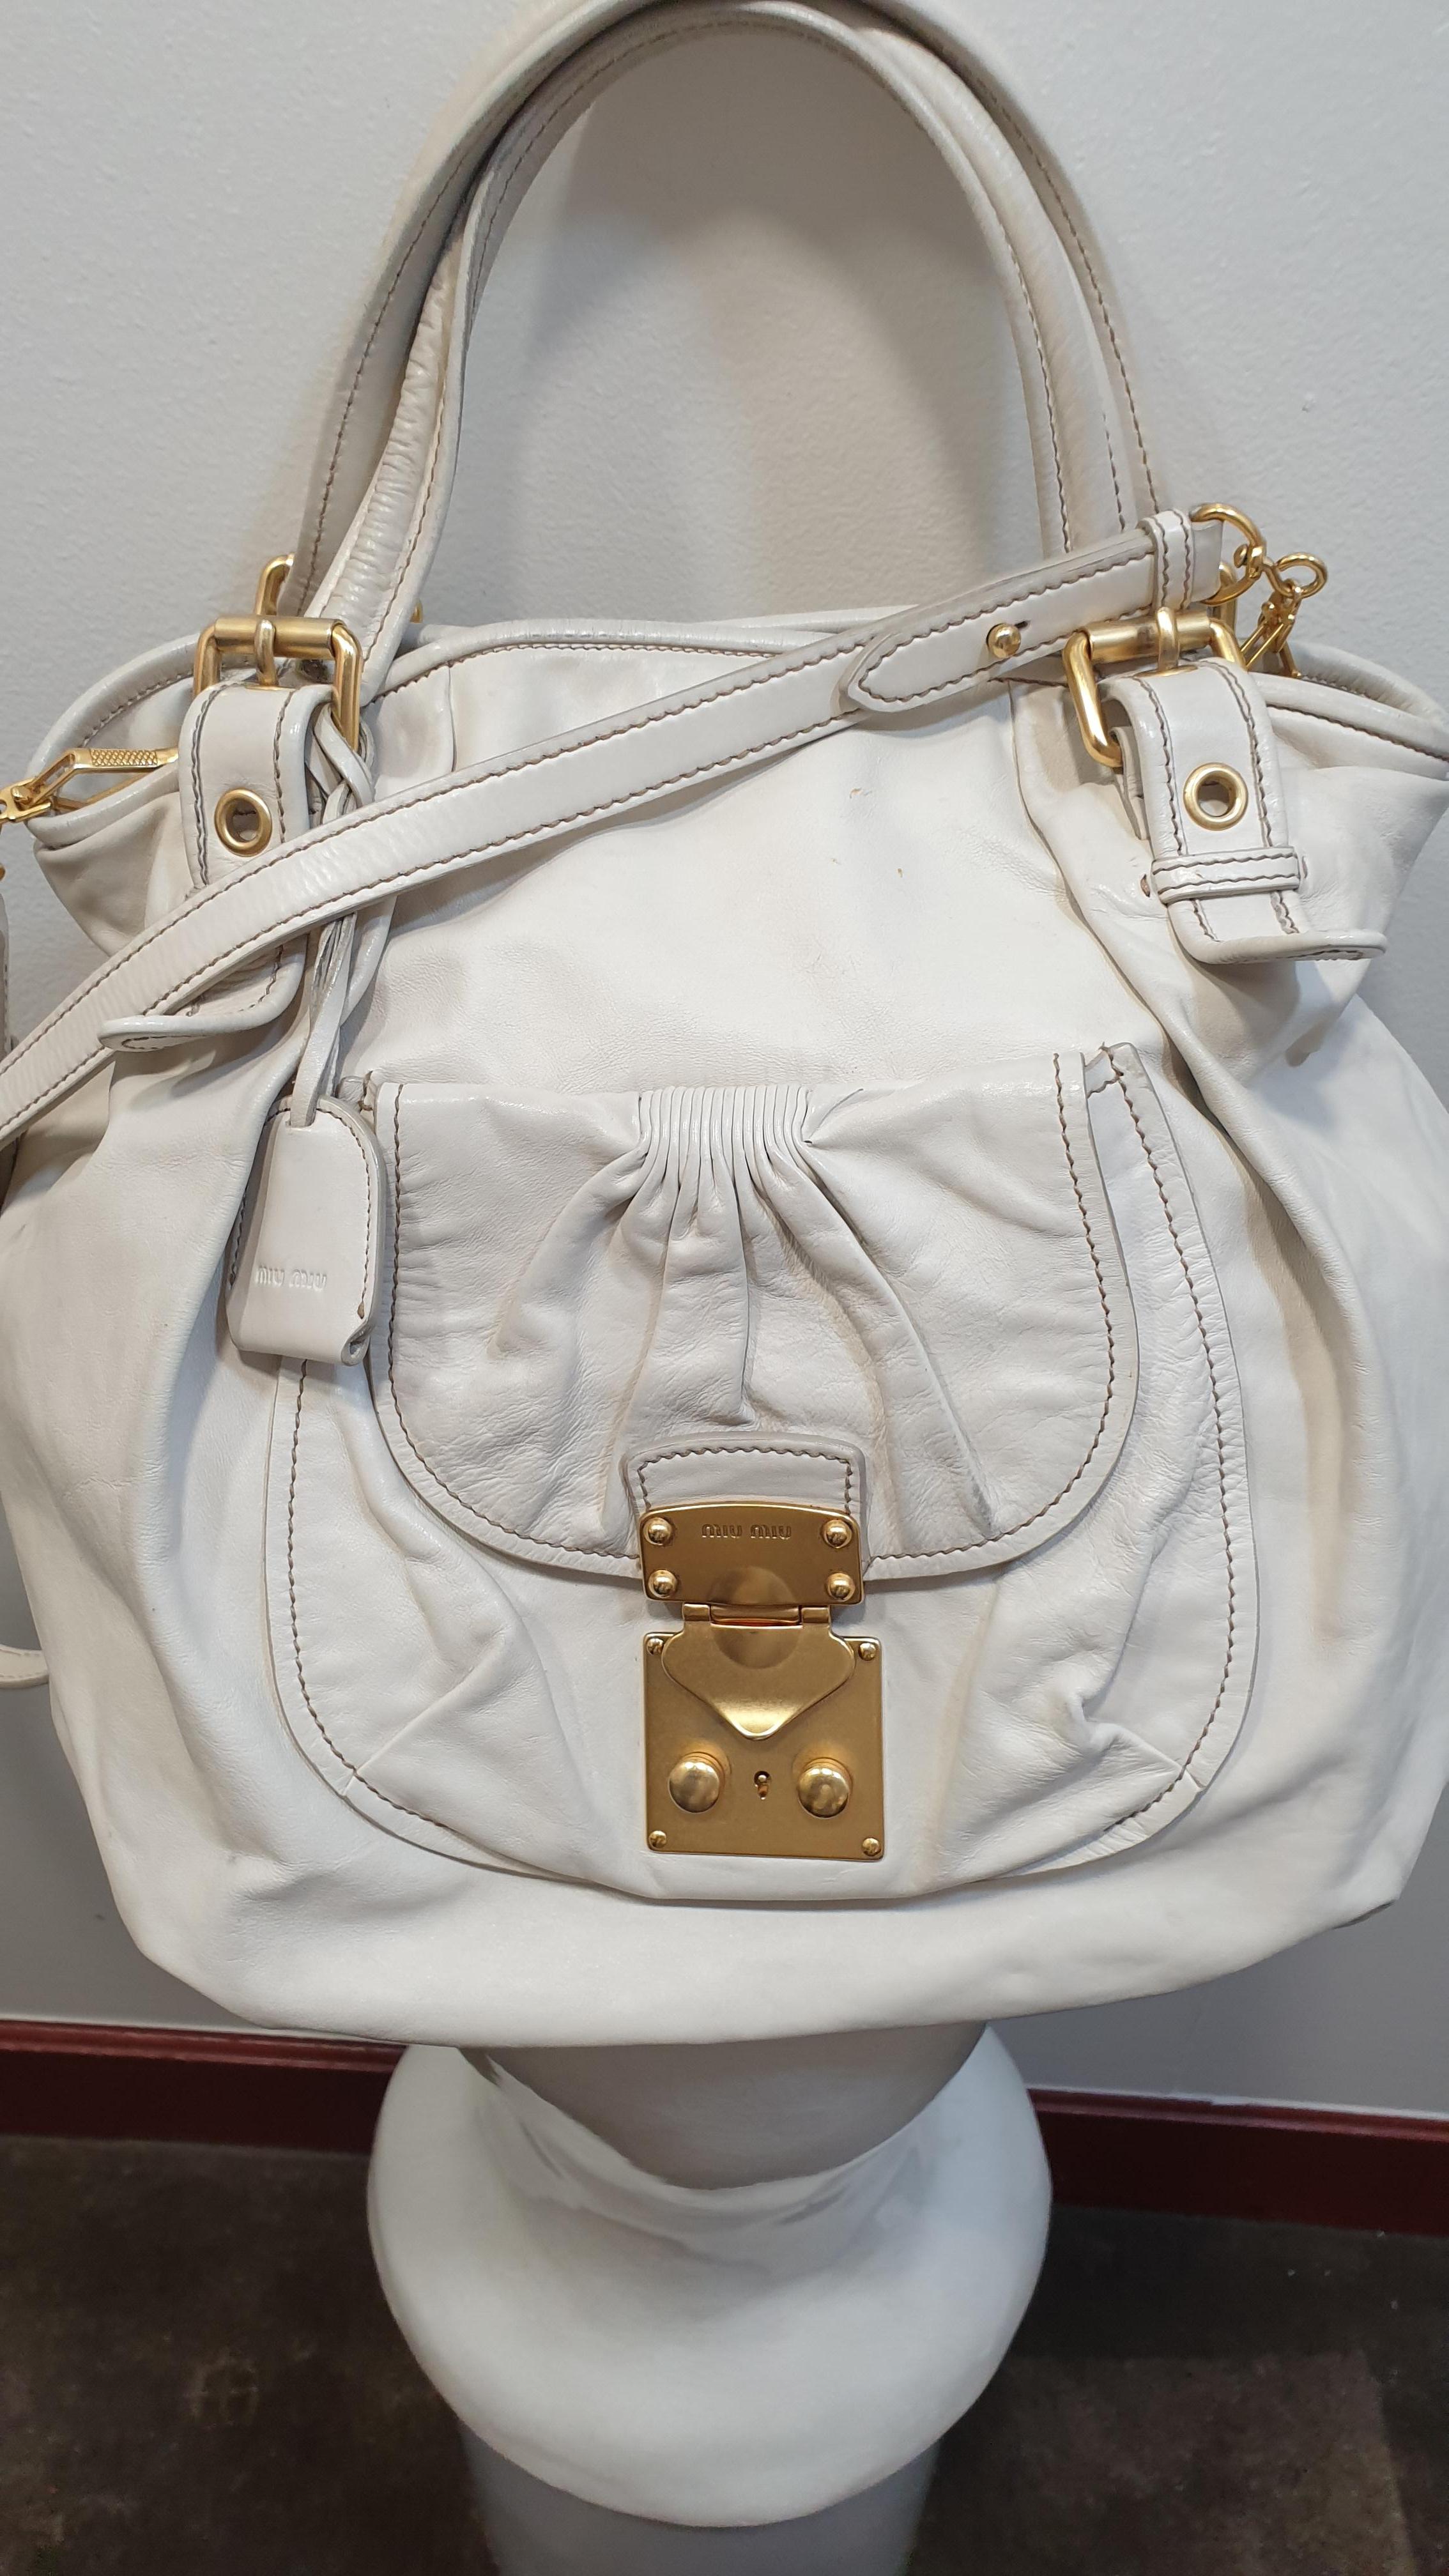 Women's Coffer Shoulder Bag Matelasse Leather White by Miu Miu For Sale